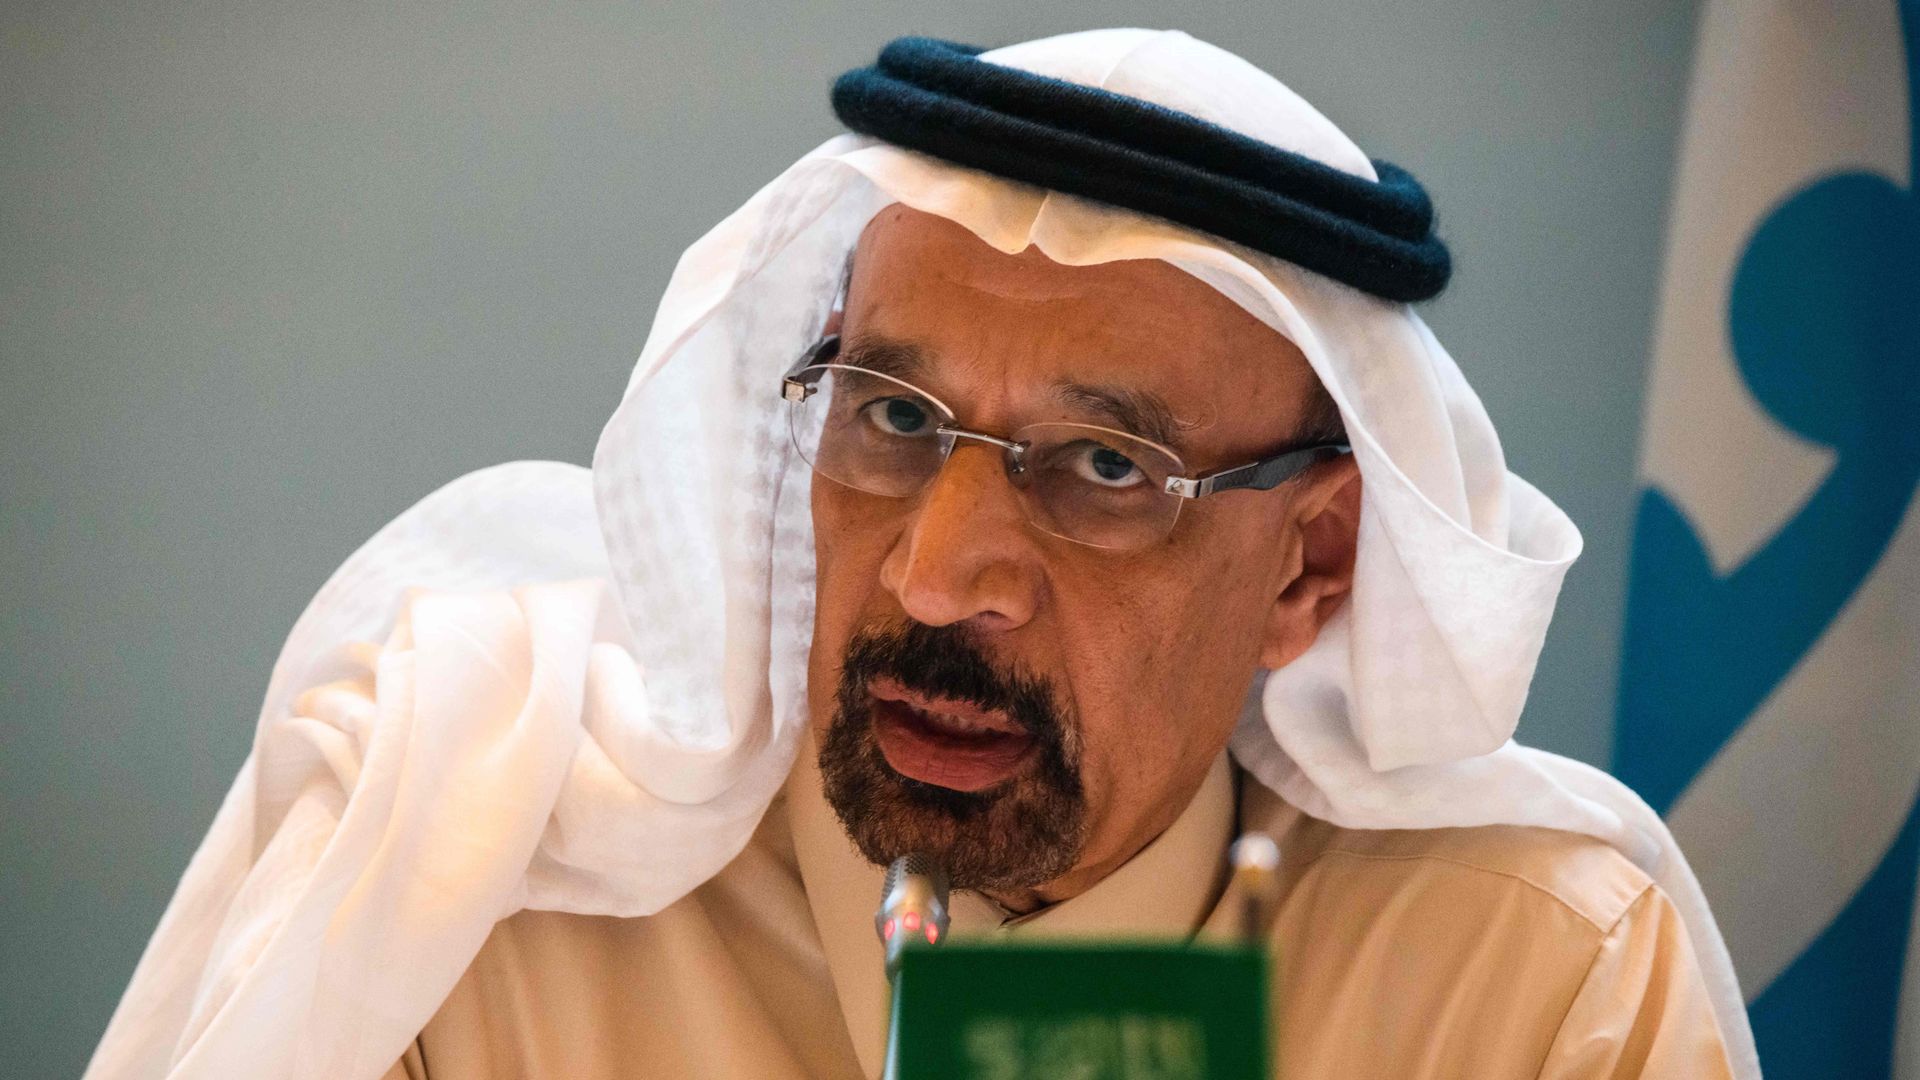 This image is a close-up of Saudi Energy Minister Khalid Al Falih talking. A blurred miniature Saudi Arabian flag sits in front of him.